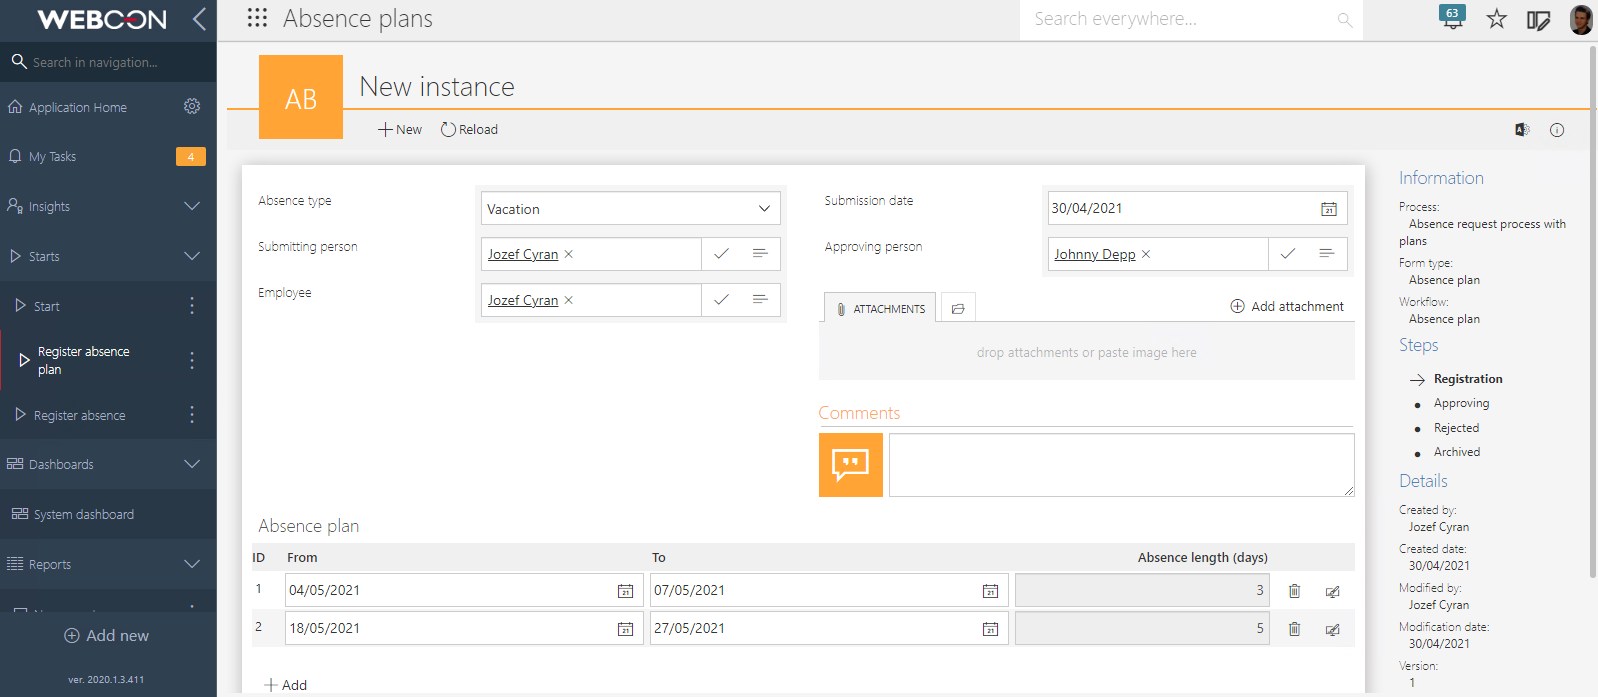 The image shows the workflow instance for registering absence plans